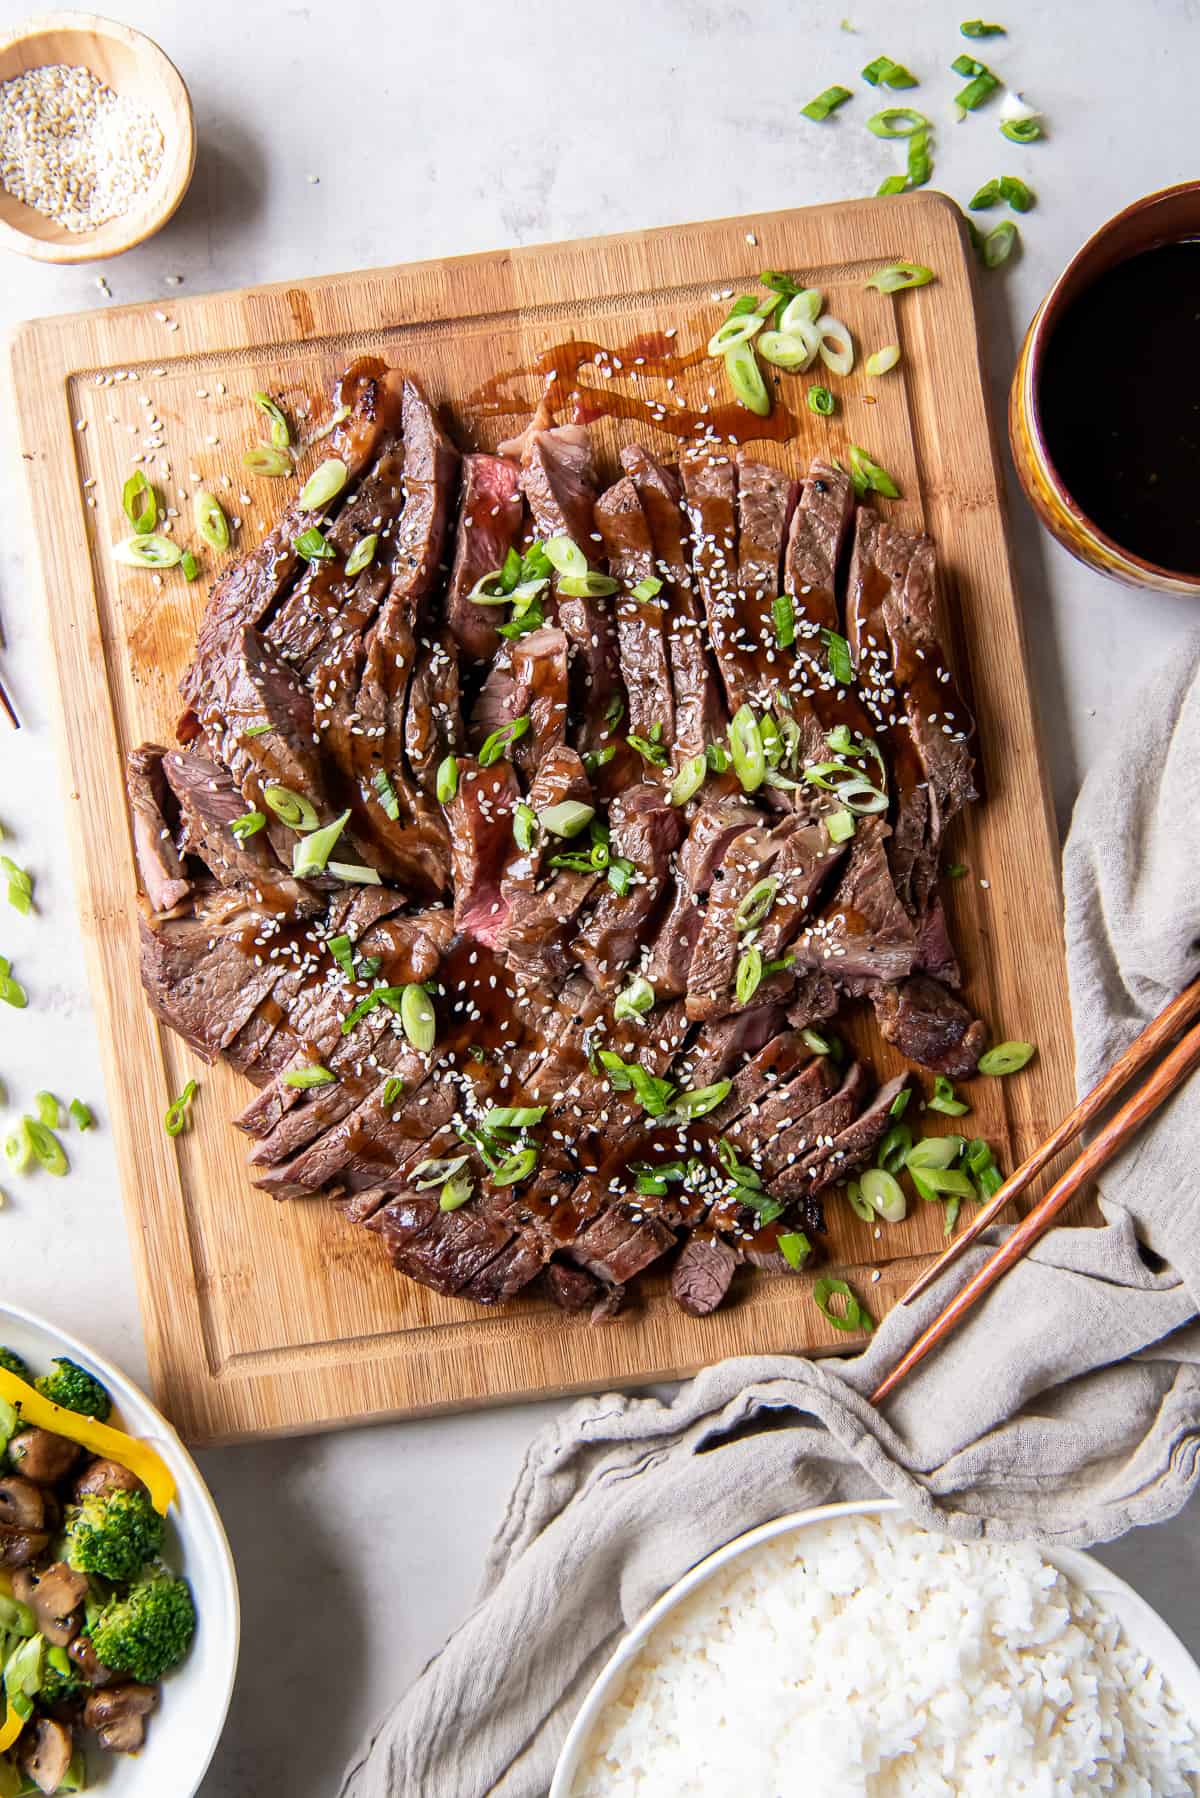 Sliced steak with teriyaki sauce topped with green onions on a wood cutting board.